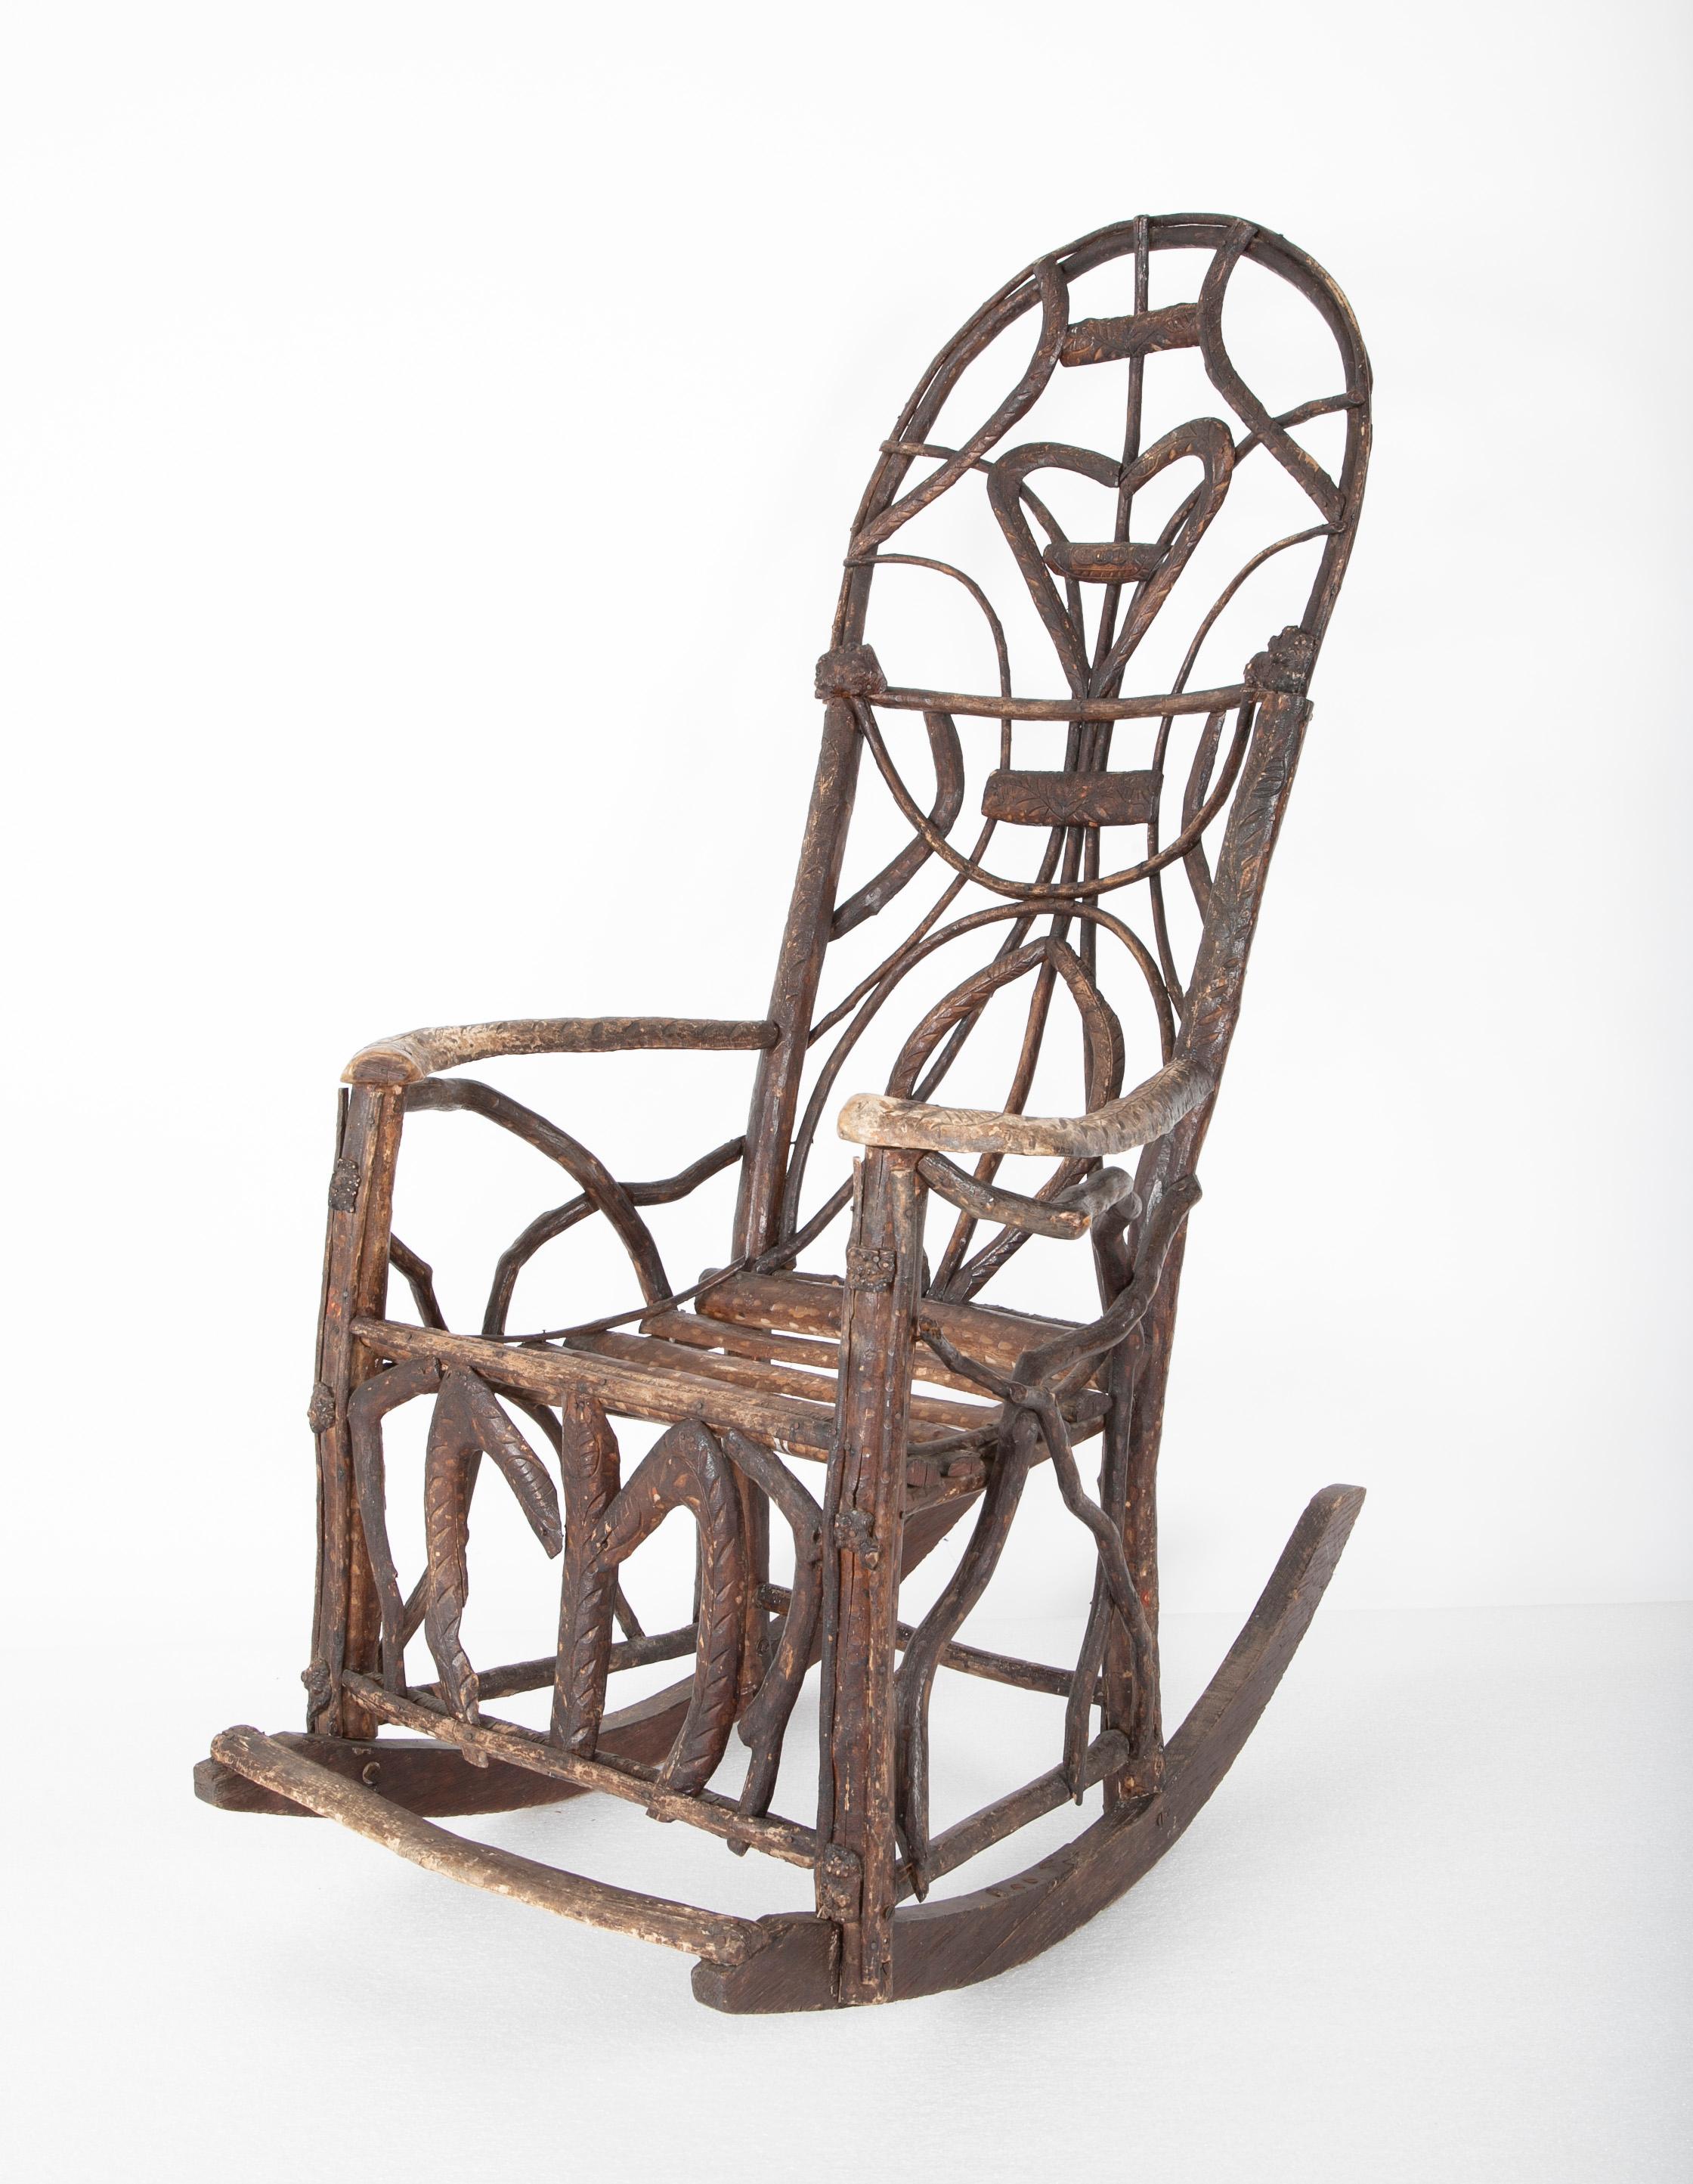 Rustic rocking chair attributed to Rev. Ben Davis of Blowing Rock, North Carolina. Chip carved decor & incised leaf & floral heart motif back, early 20th century.